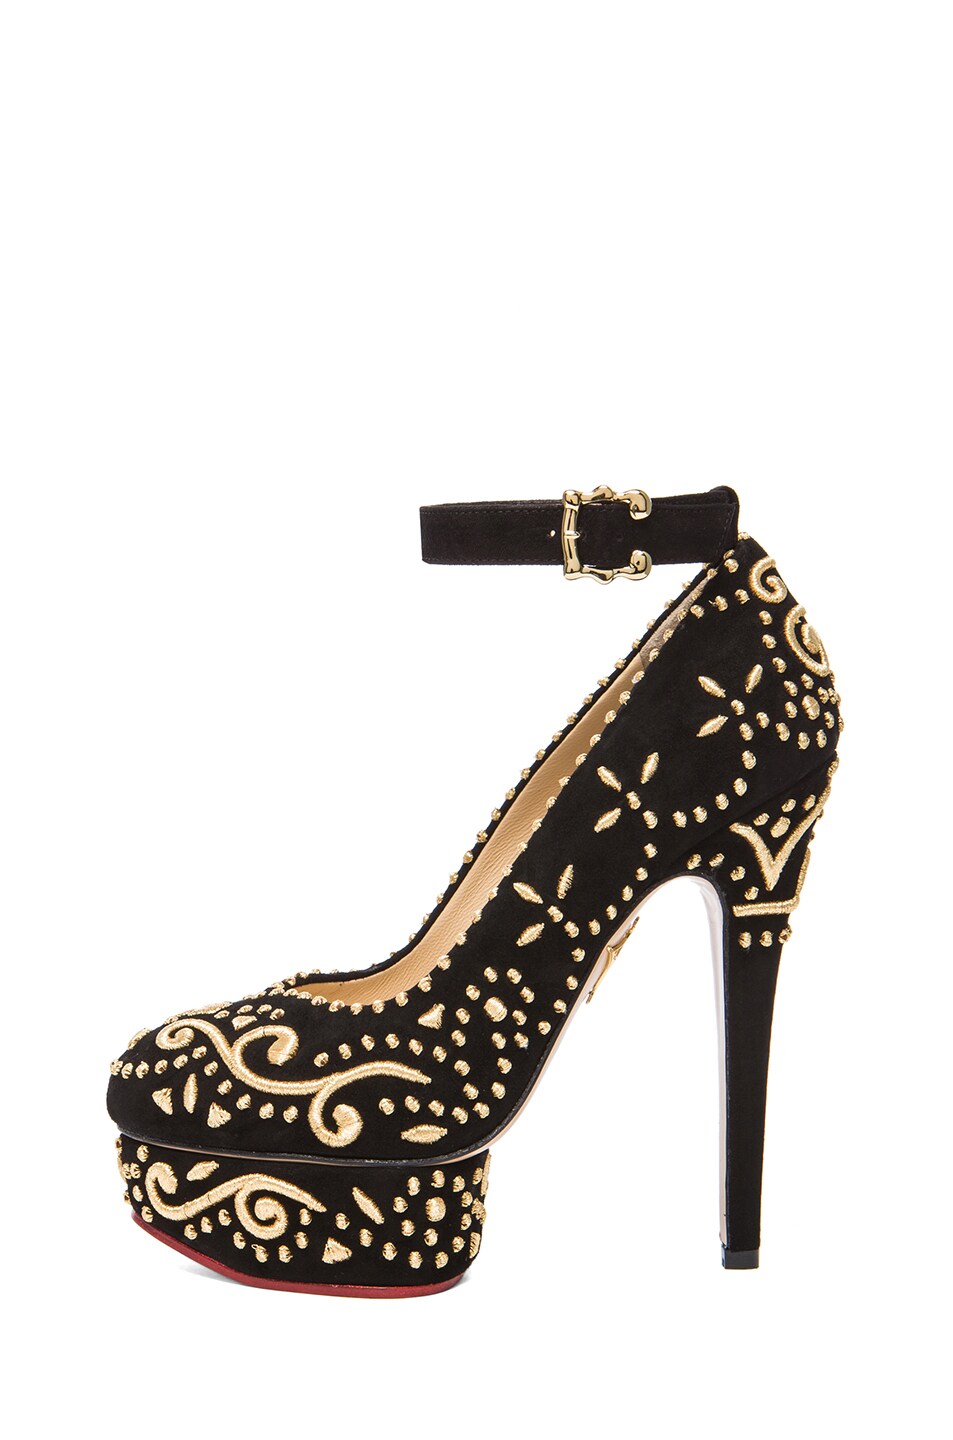 Image 1 of Charlotte Olympia Abigail Embroidered Suede Pumps in Black